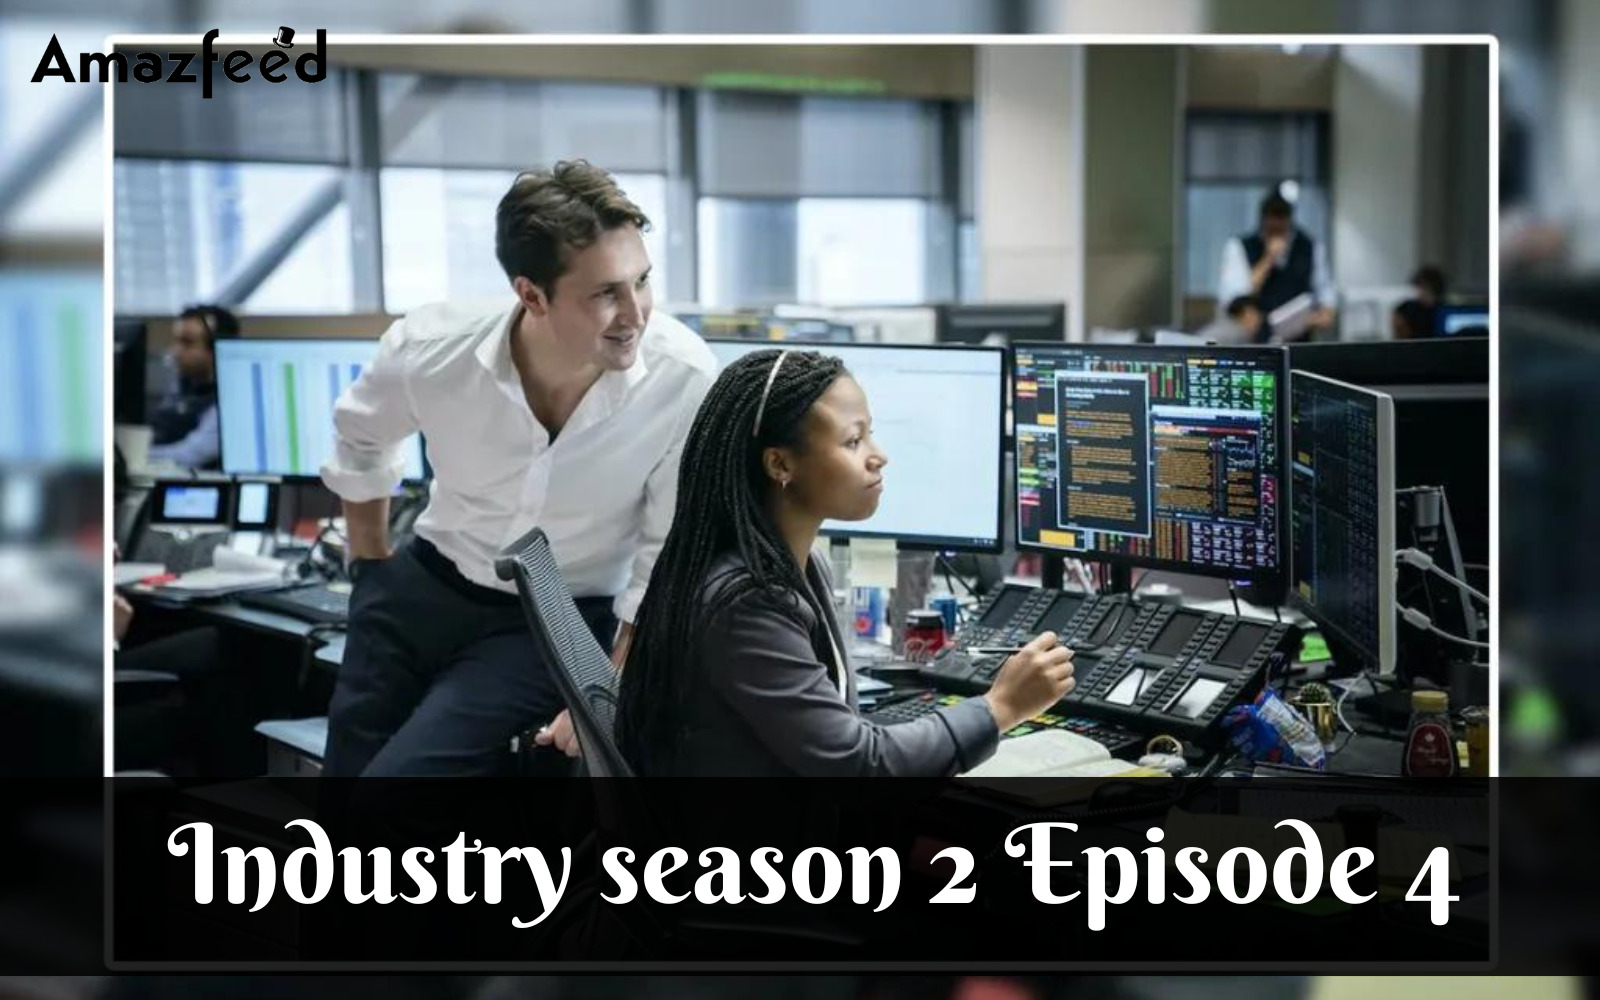 Industry season 2 Episode 4 Expected Release Date